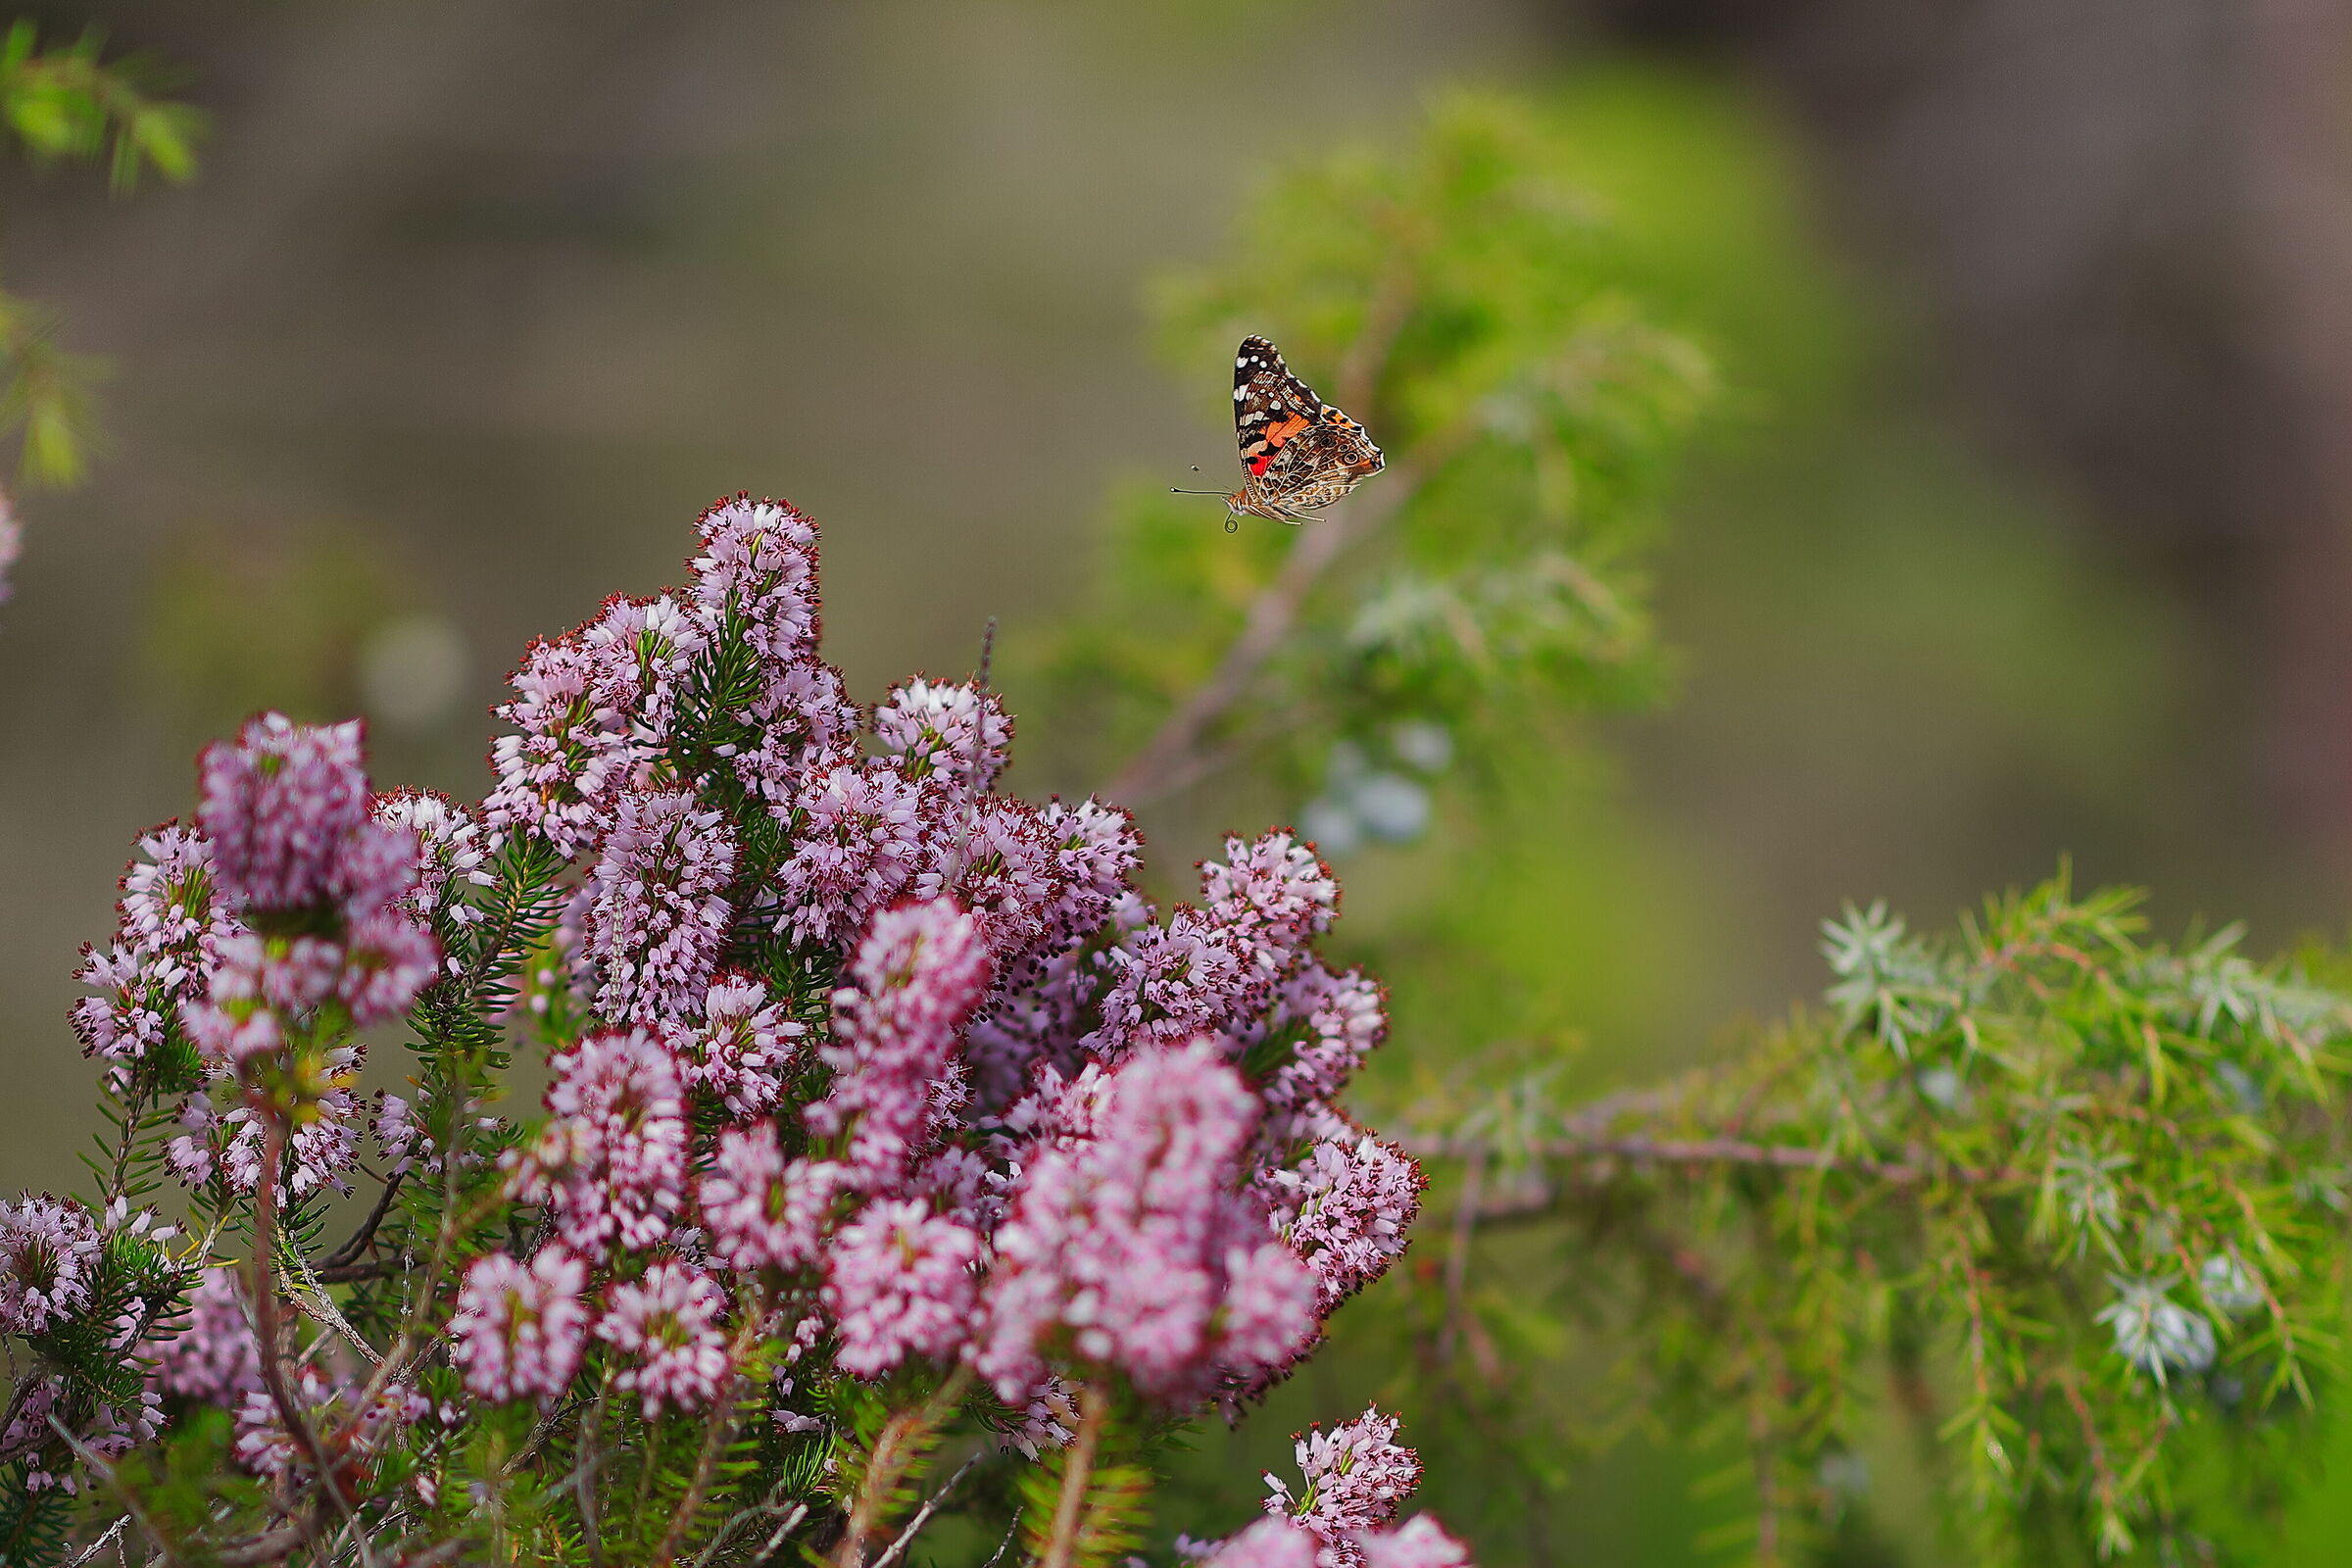 Butterfly rests on heather flowers...